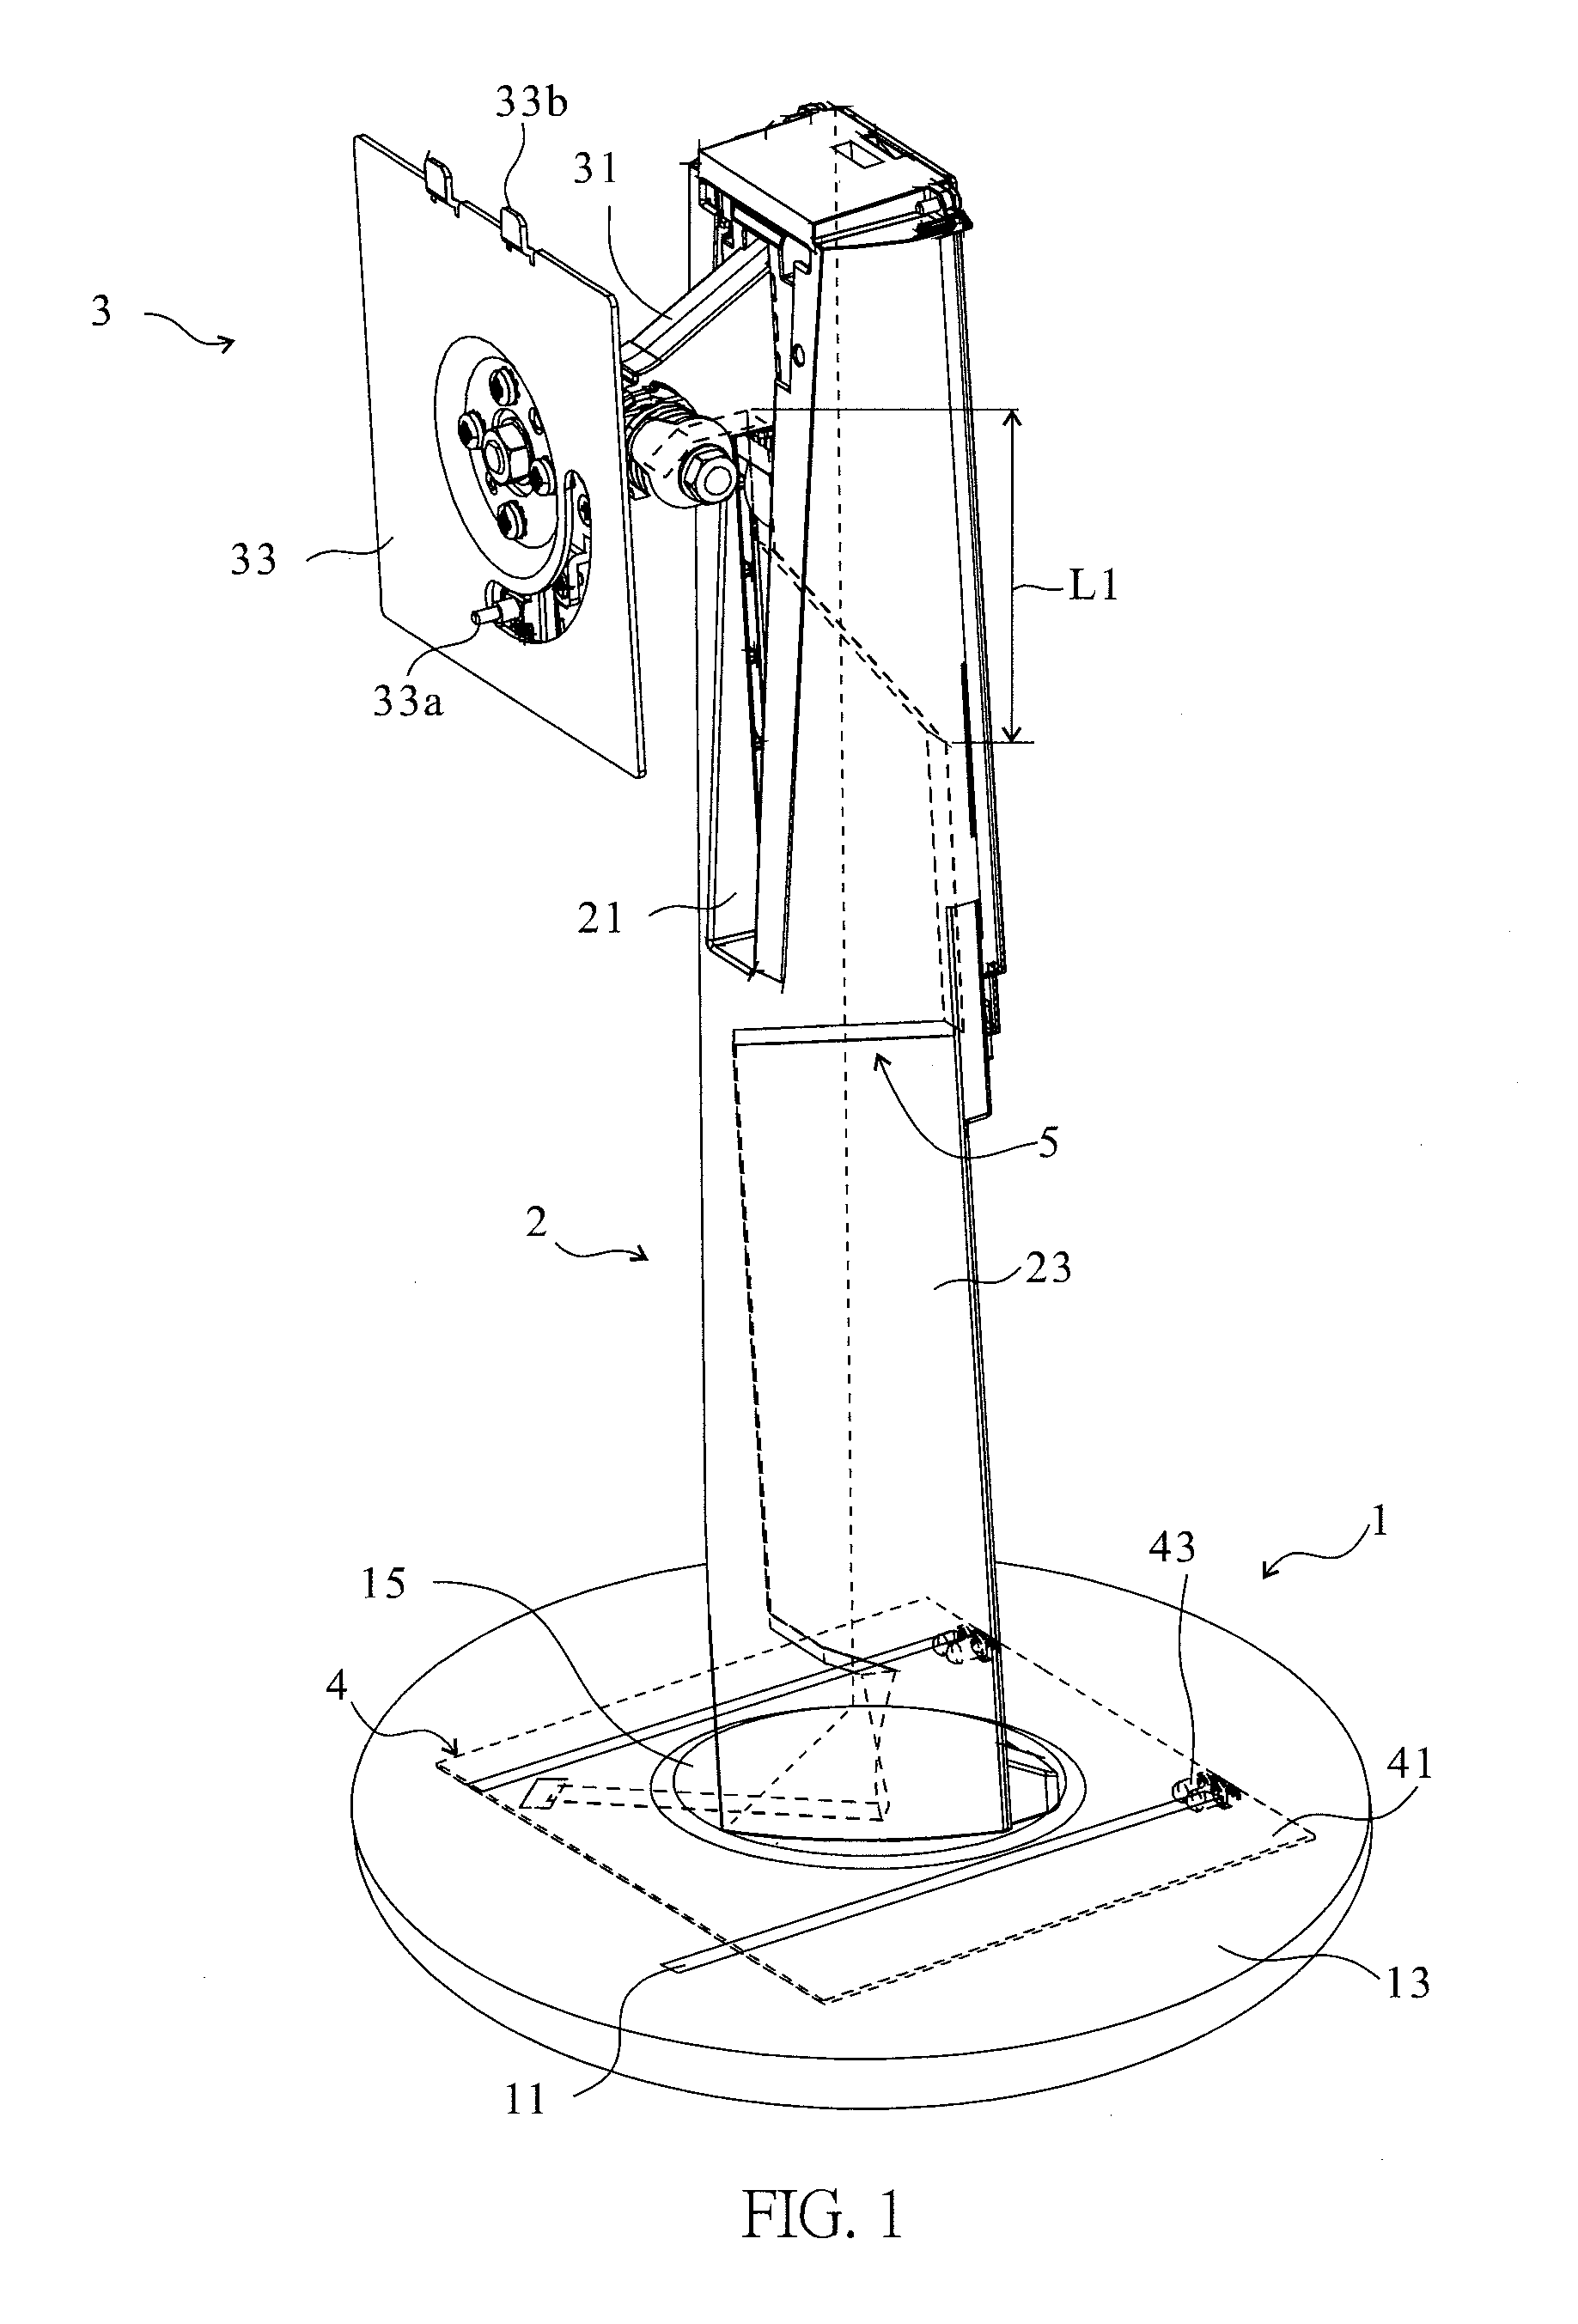 Supporting stand for display device